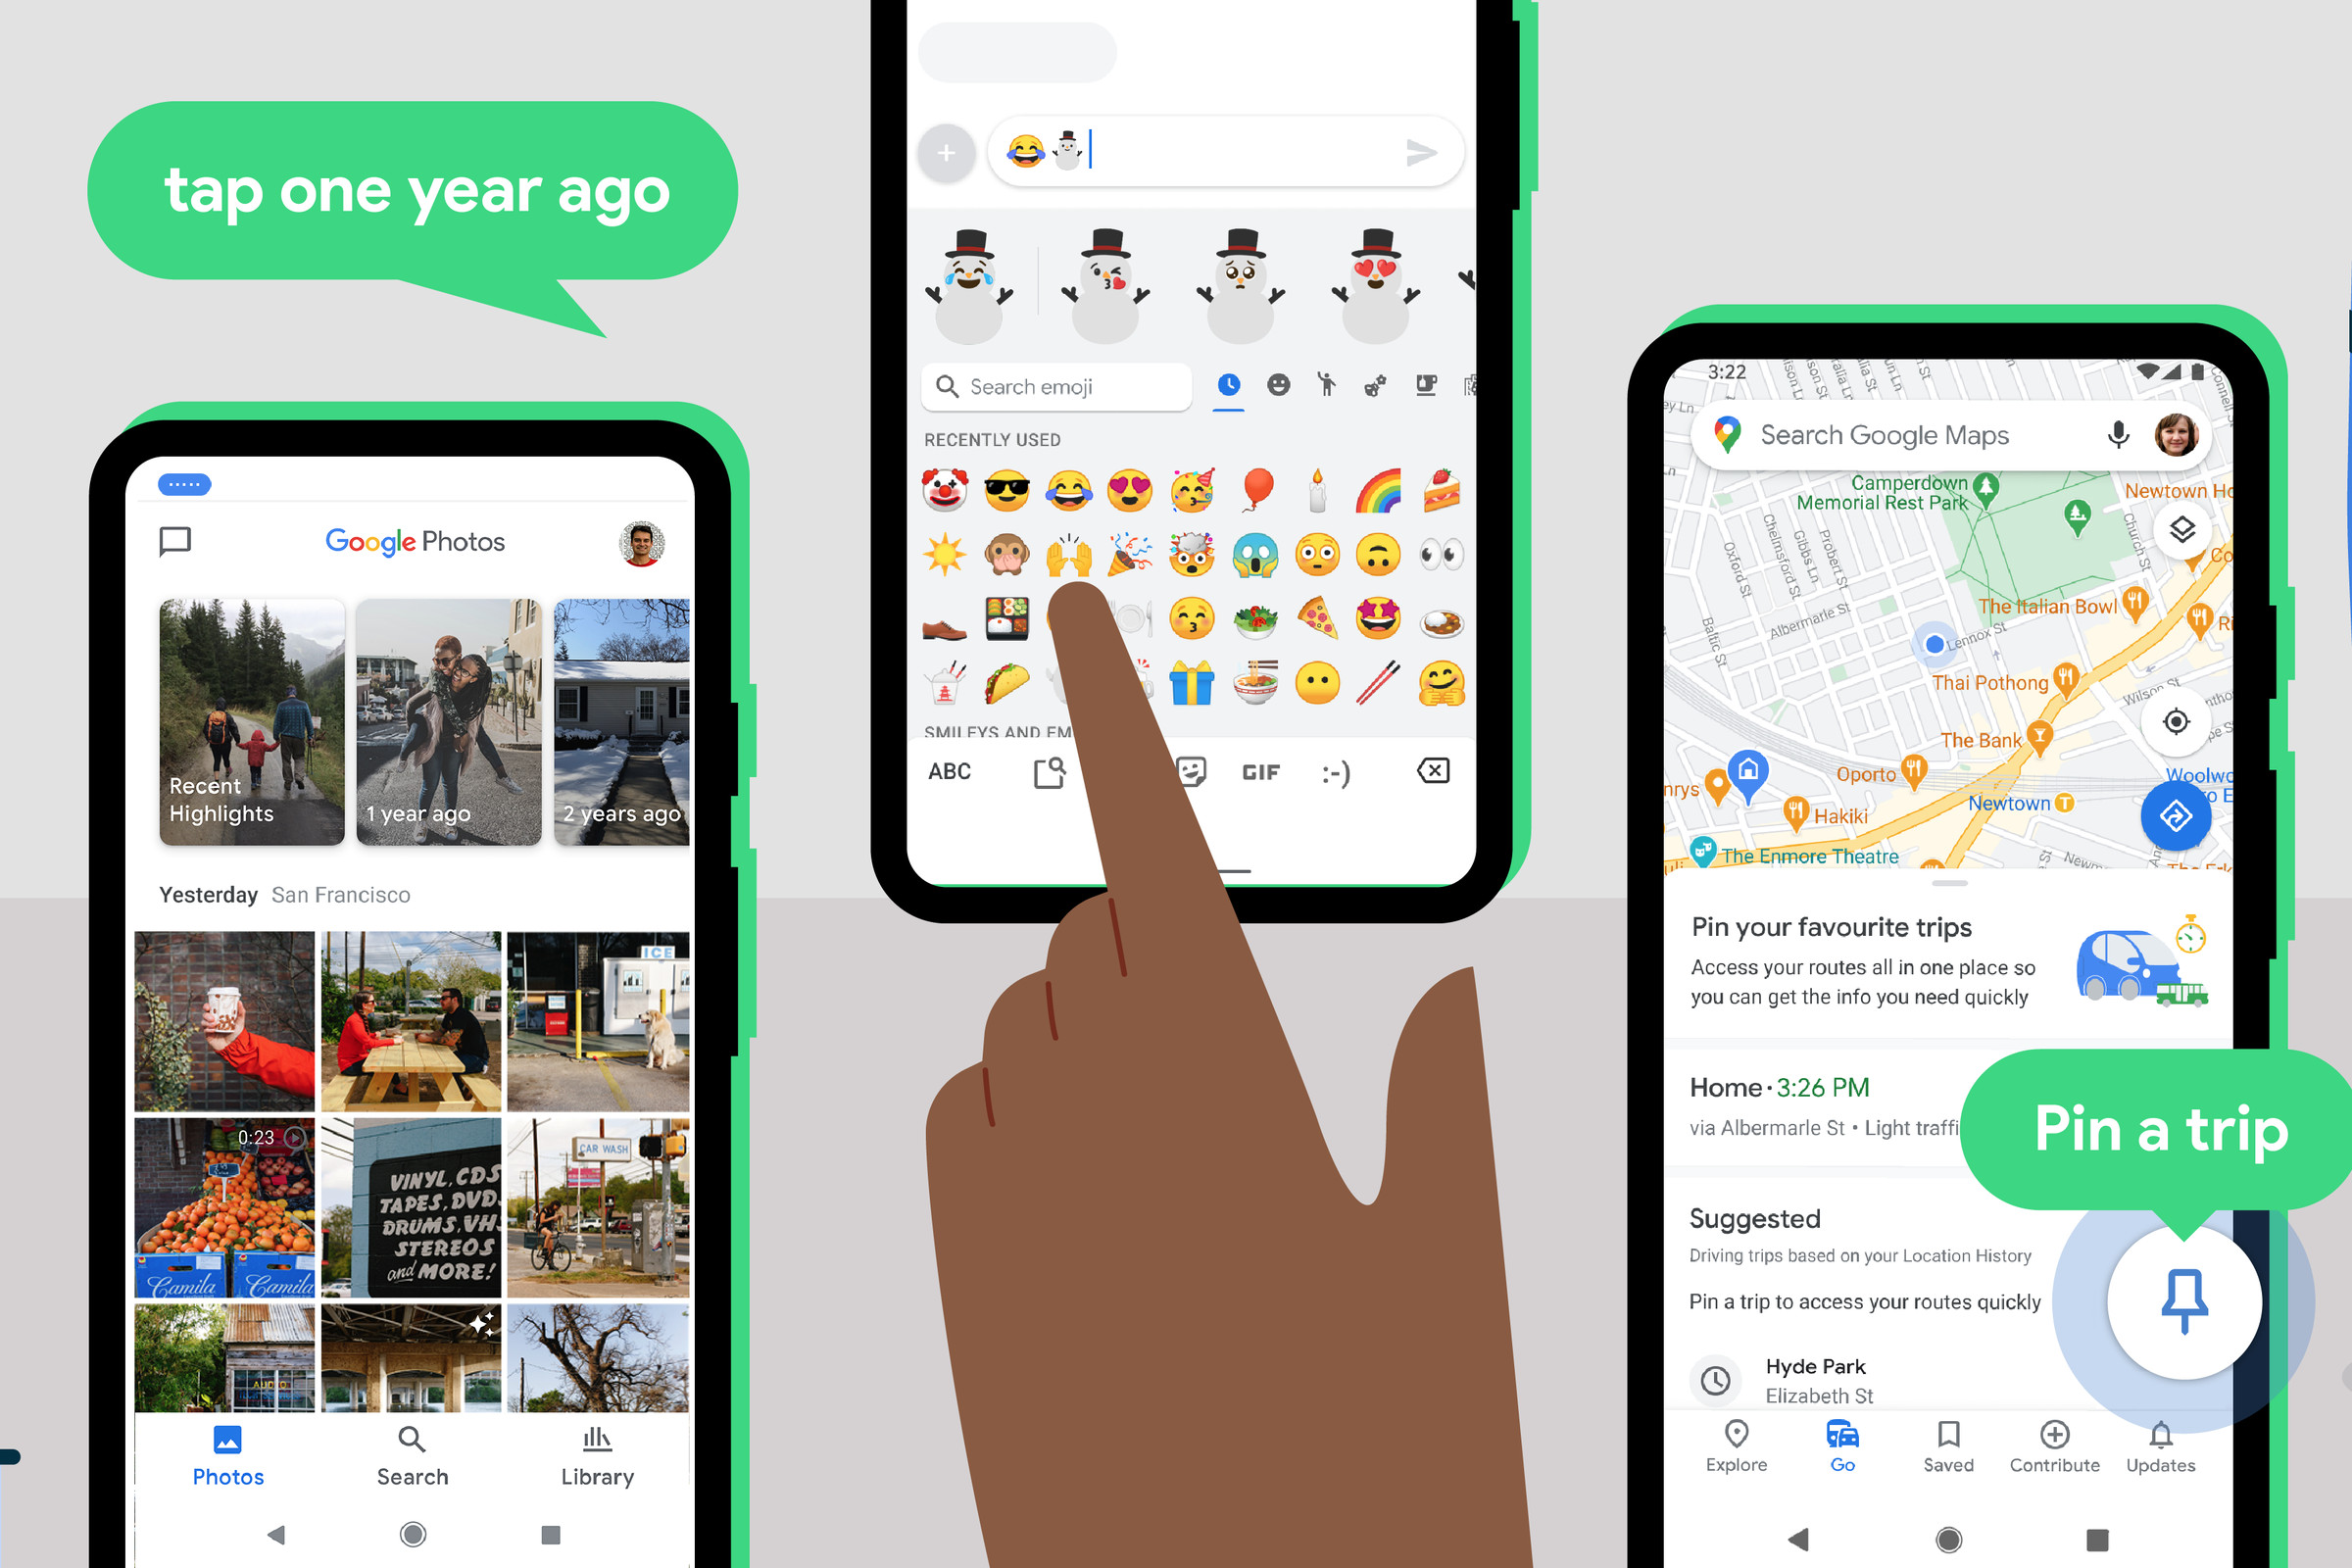 New features coming for Google Maps, Gboard, Voice Access, Google Play Books, and Nearby Share.